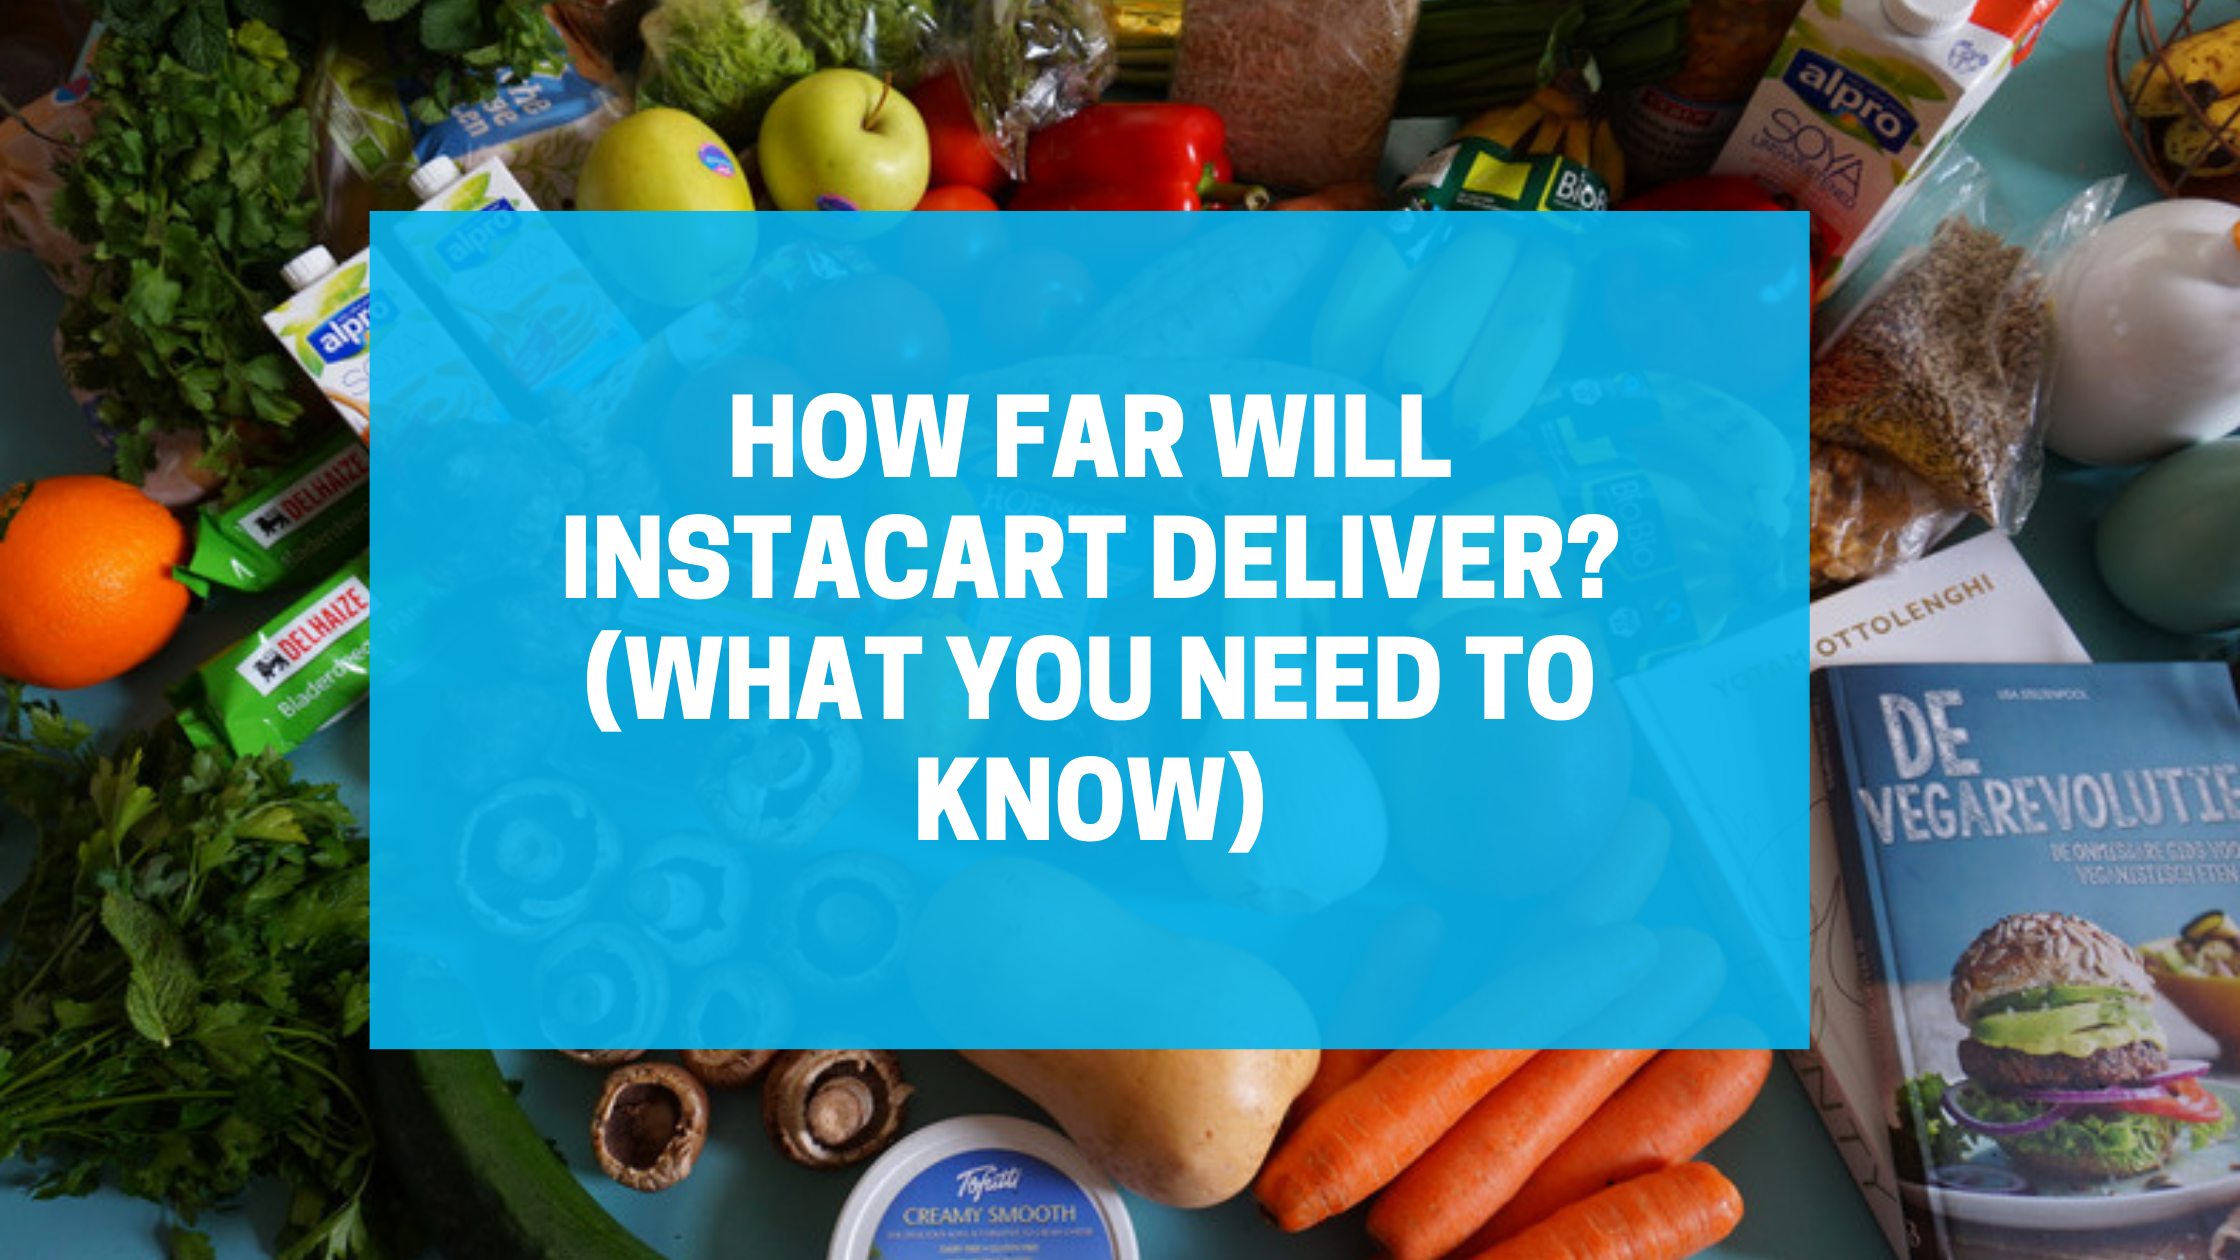 How Far Will Instacart Deliver? (What You Need To Know)